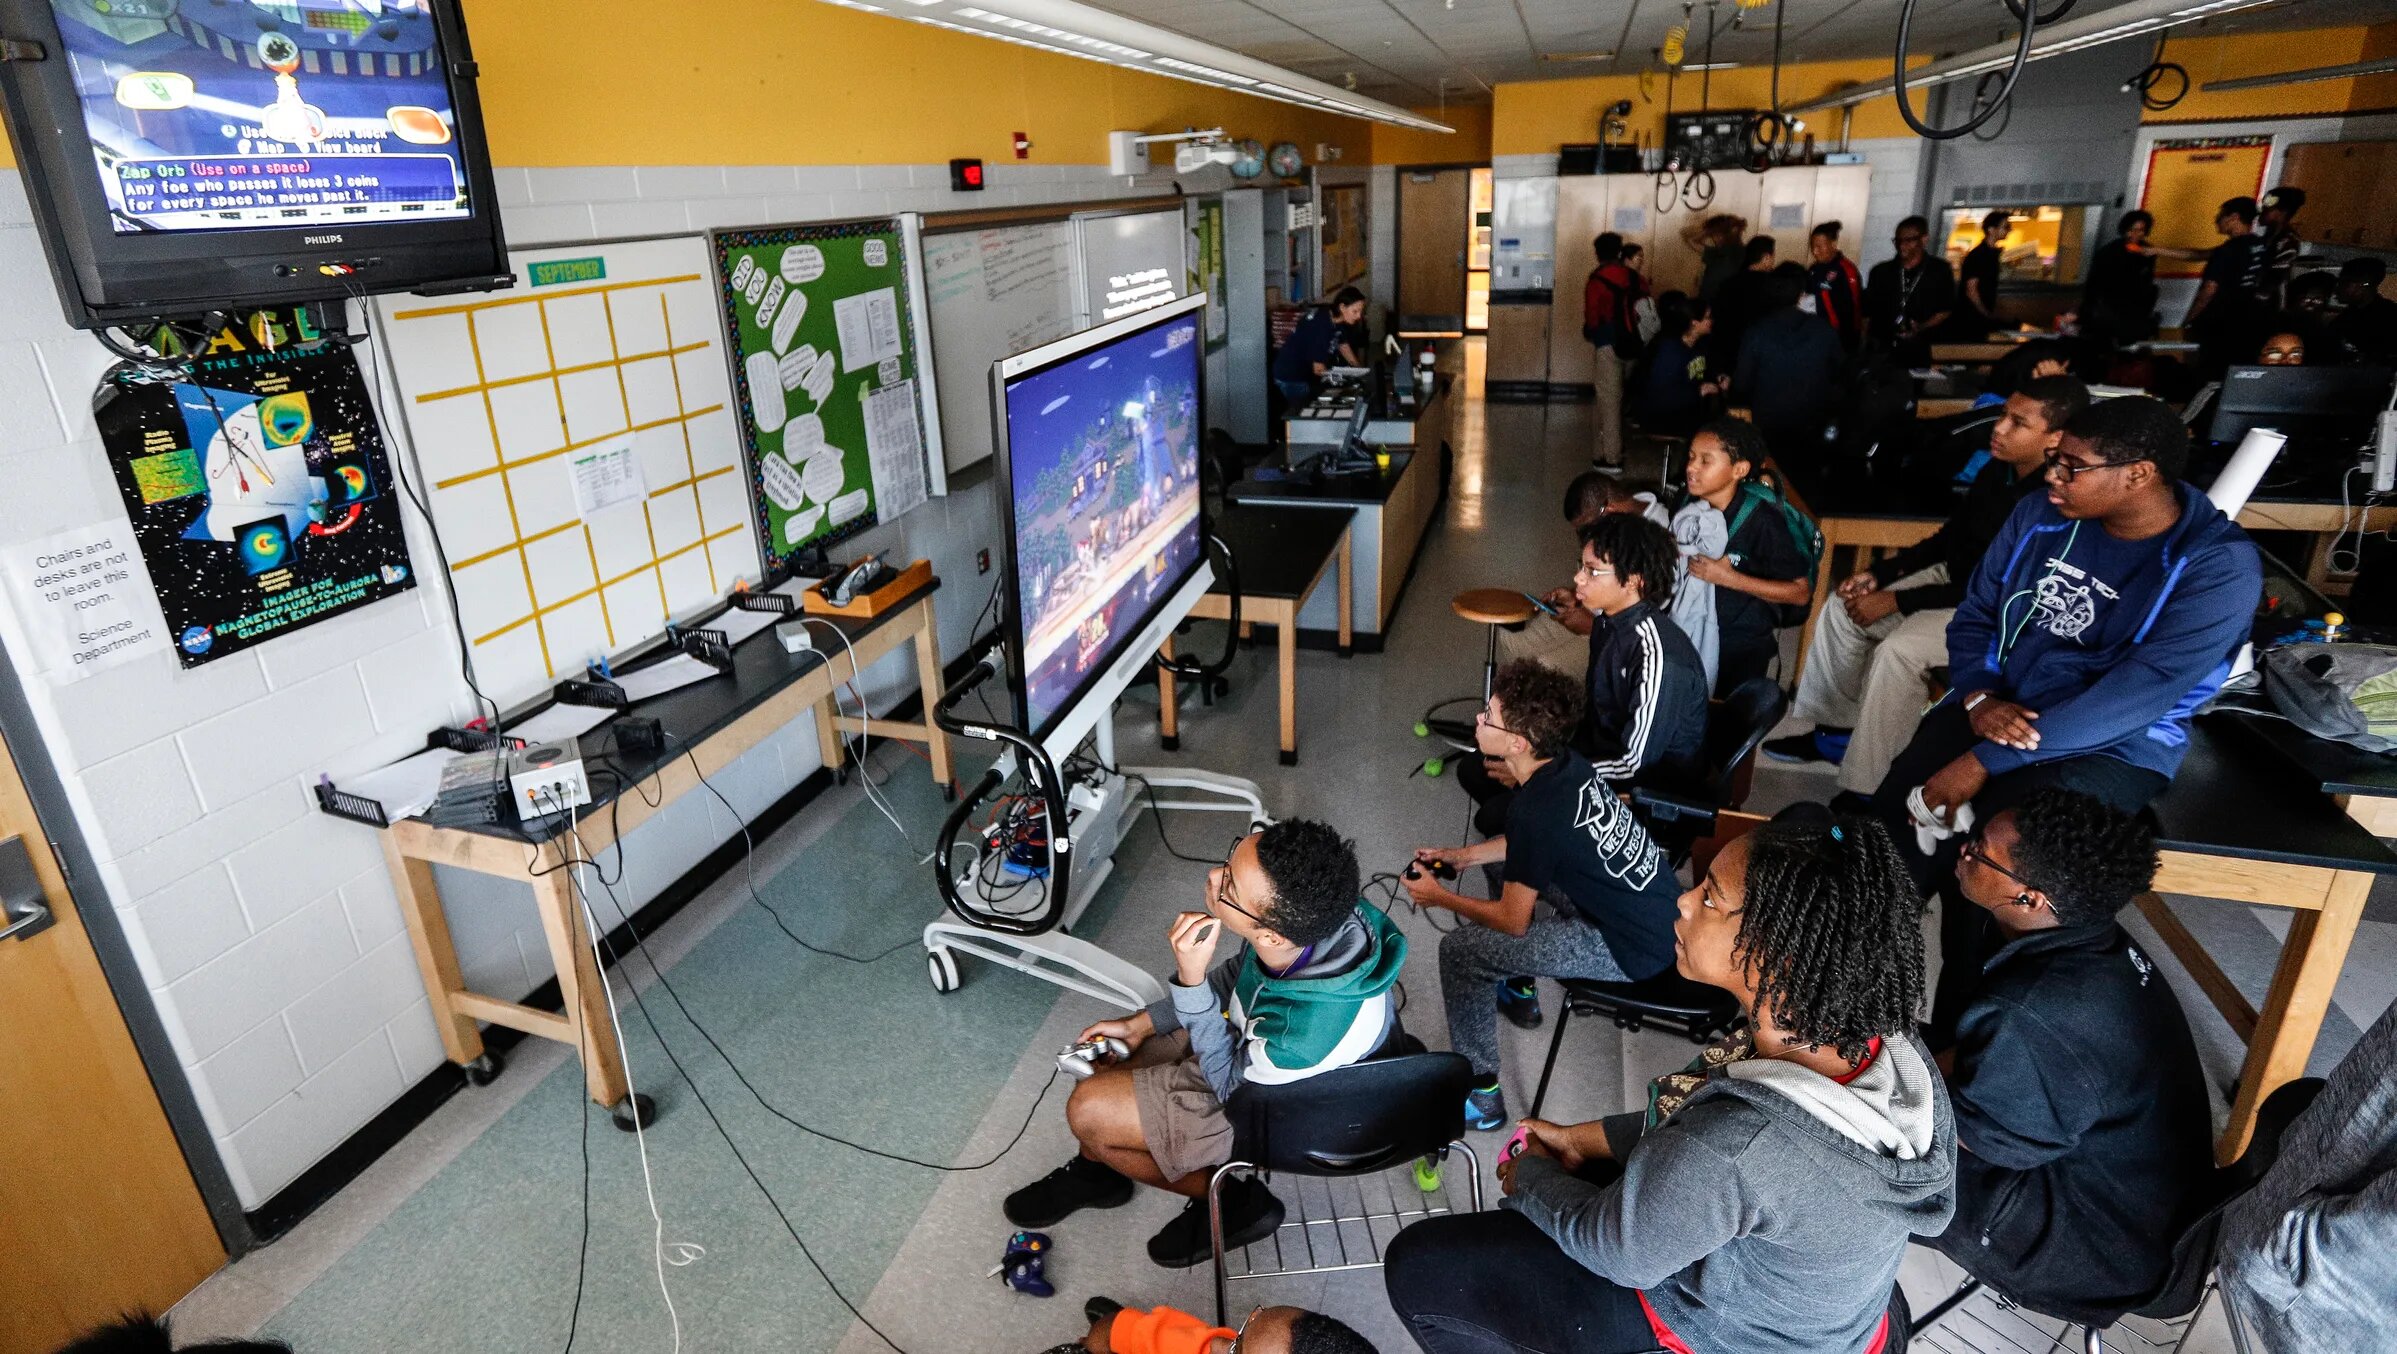 According To A Recent Poll, The Vast Majority Of Adults Believe That Video Games Should Be Taught In School